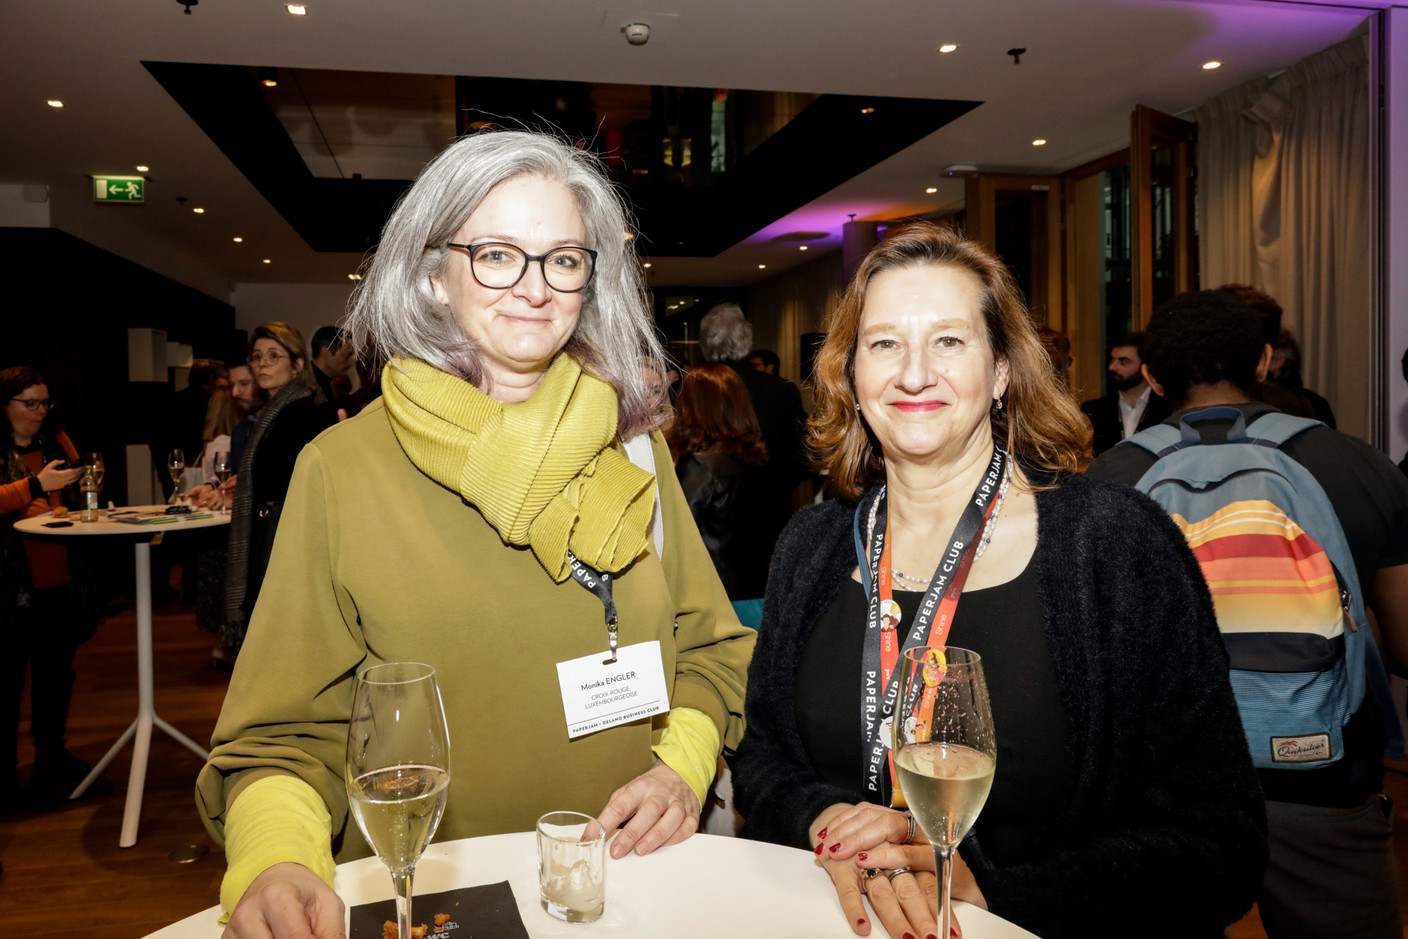 Monika Engler (Croix-Rouge luxembourgeoise) et Mary Carey (PwC). (Photo: Marie Russillo/Maison Moderne)